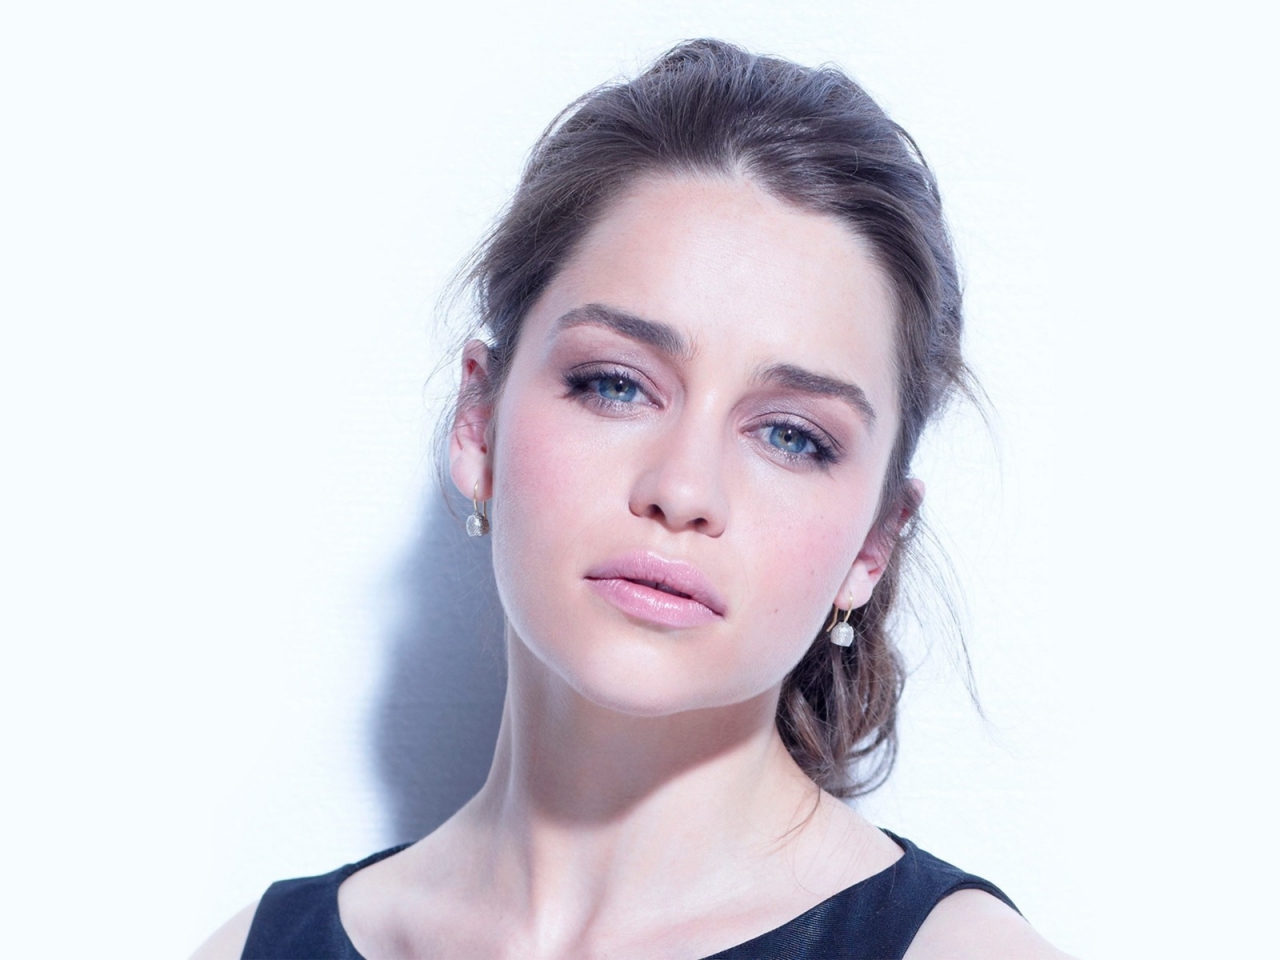 Emilia Clarke Game of Thrones for 1280 x 960 resolution